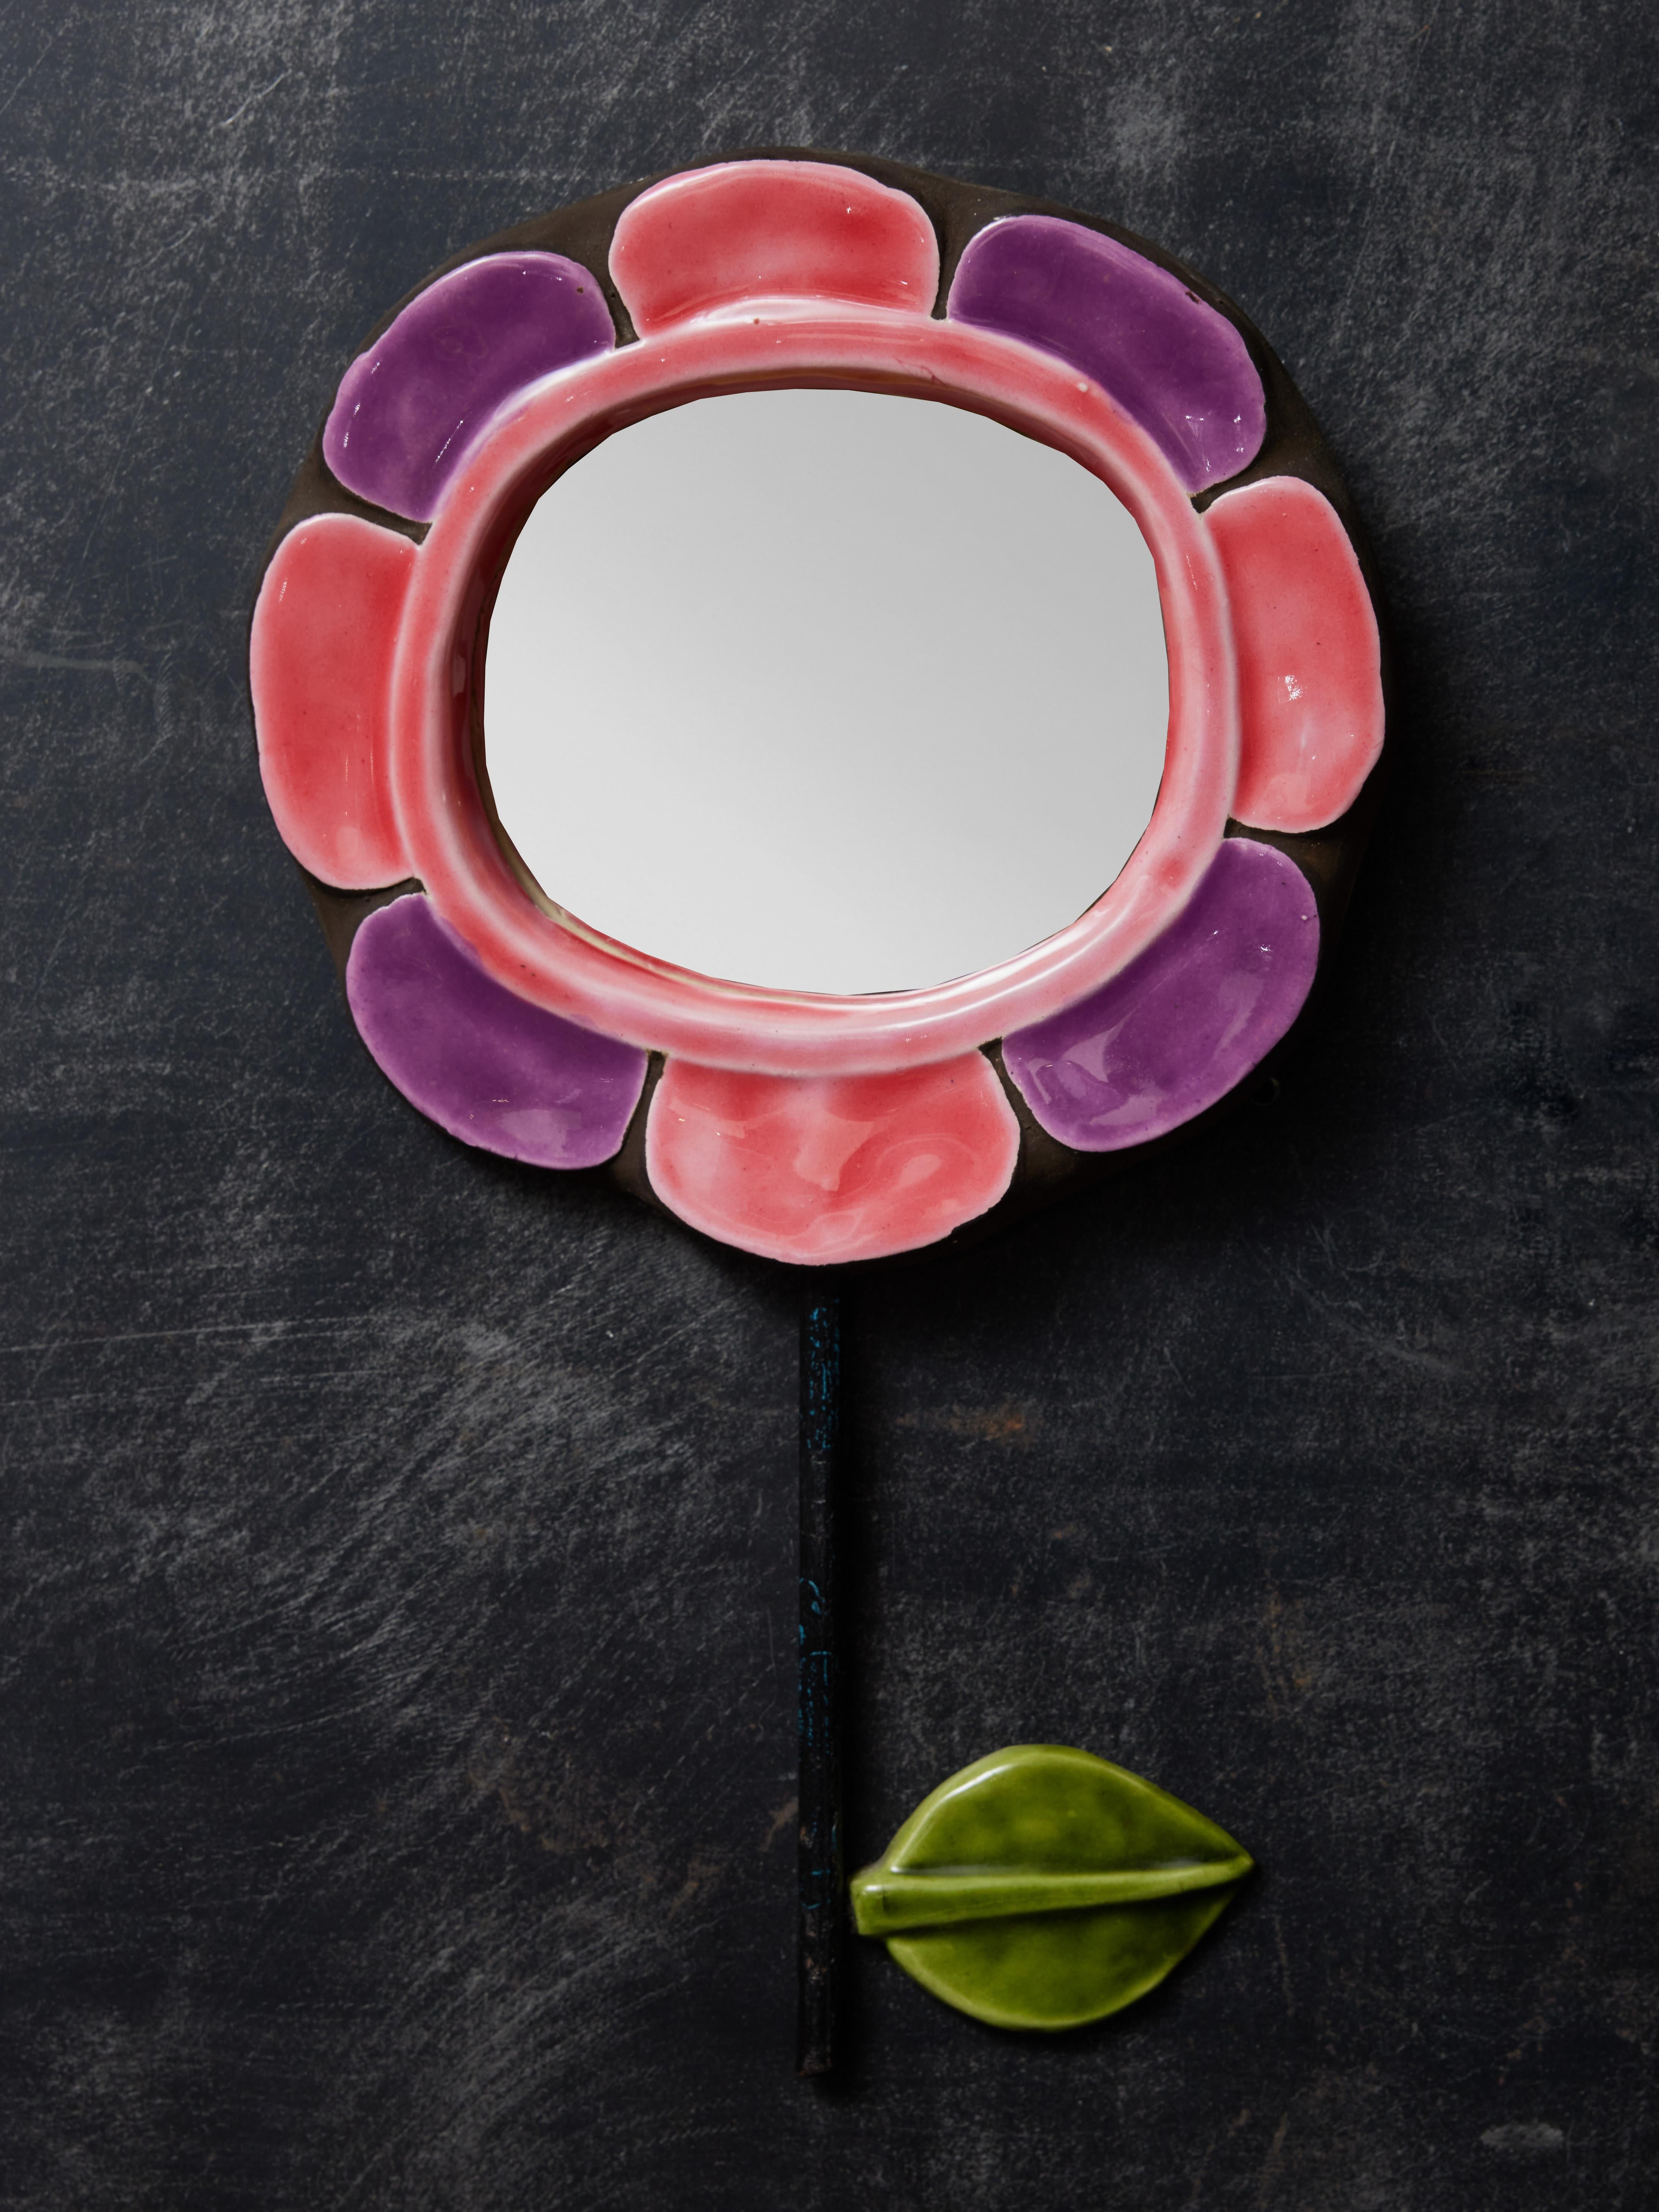 Ceramic mirror shaped like a flower with pink and purple petals. Vertical metal stem on which is attached a green coloured  ceramic leaf. Made by Mithé Espelt.

Marie Thérèse Espelt, aka. Mithé Espelt (1923-2020)



Born in the town of Lunel, near